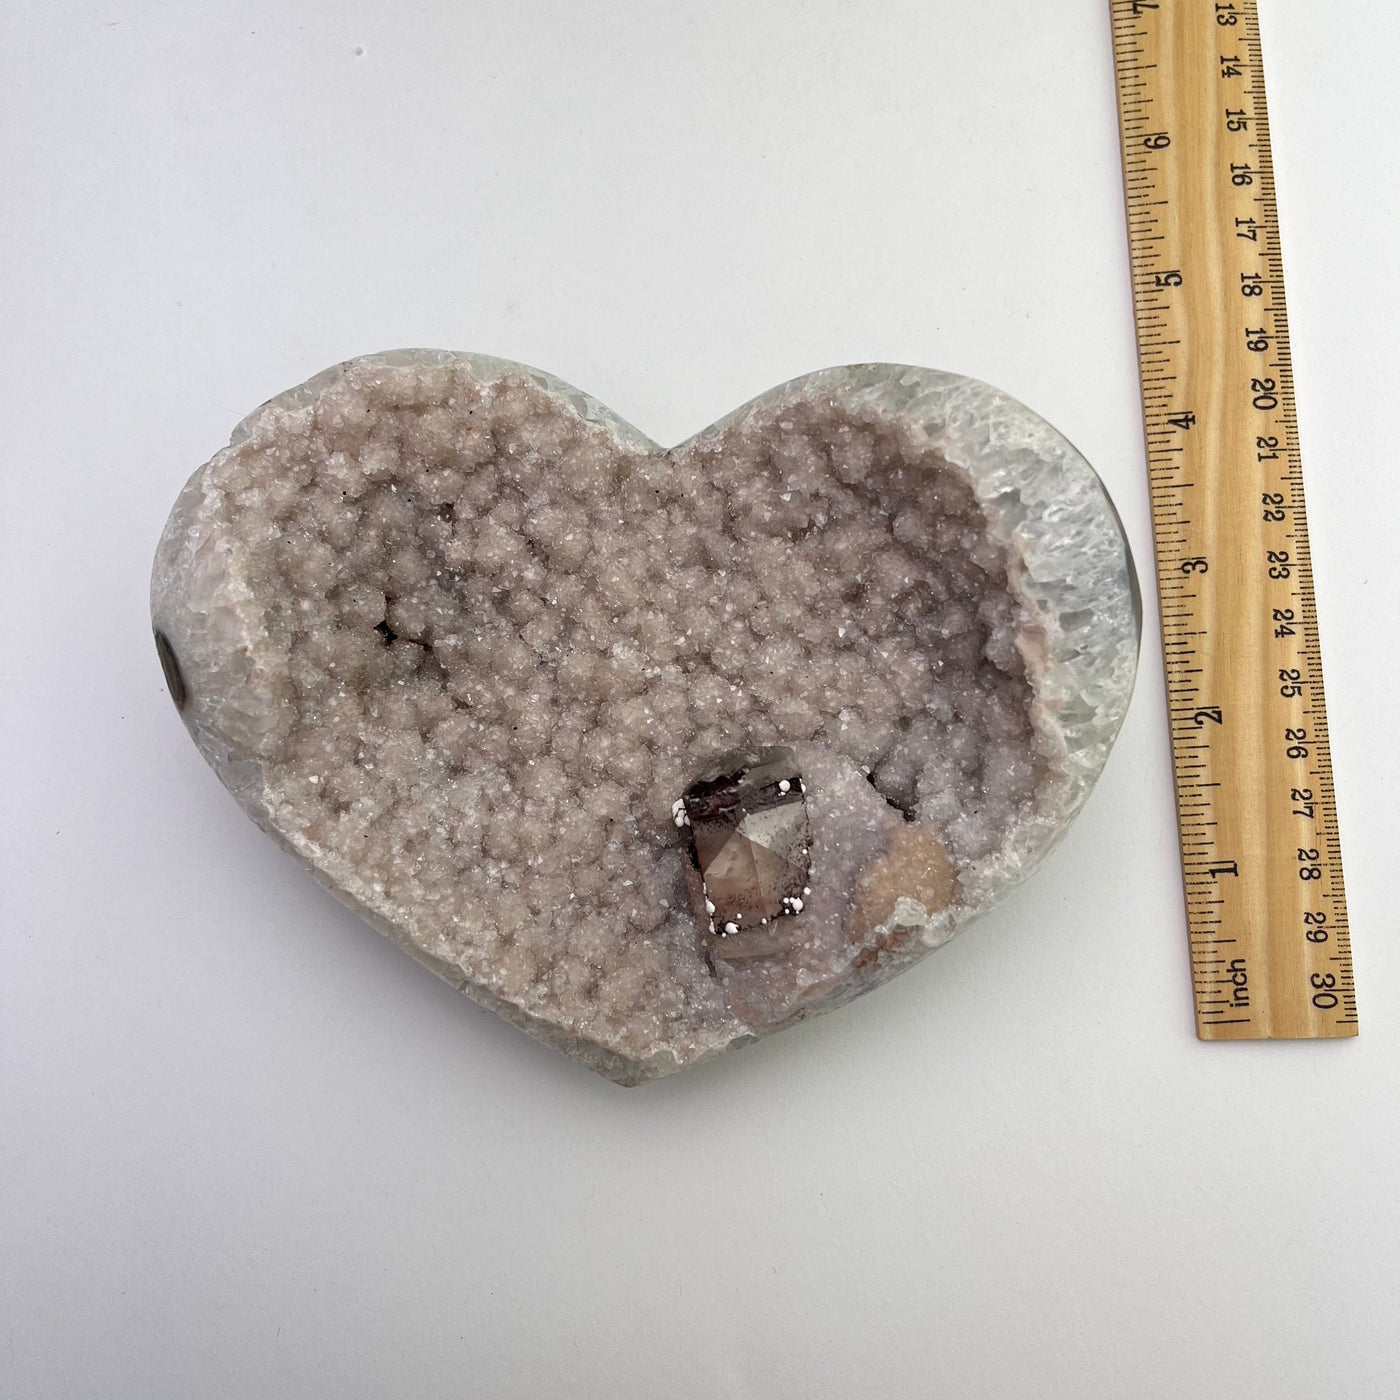 Natural Druzy Agate Heart With Calcite Formation with ruler for size reference 